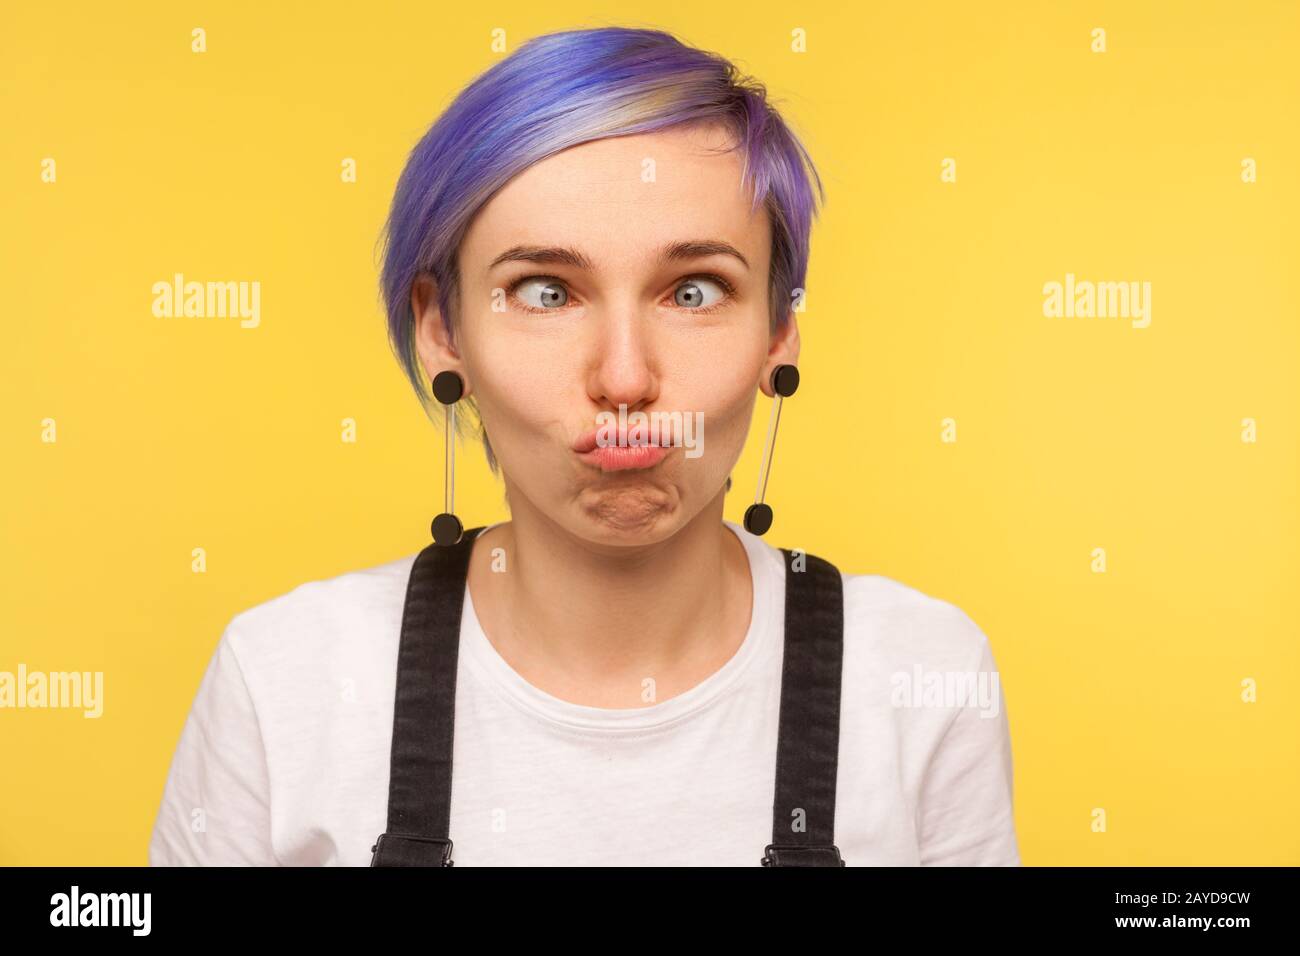 Portrait of comic hipster girl with violet short hair looking cross eyed, making silly awkward face expression, having fun and playing fool. isolated Stock Photo